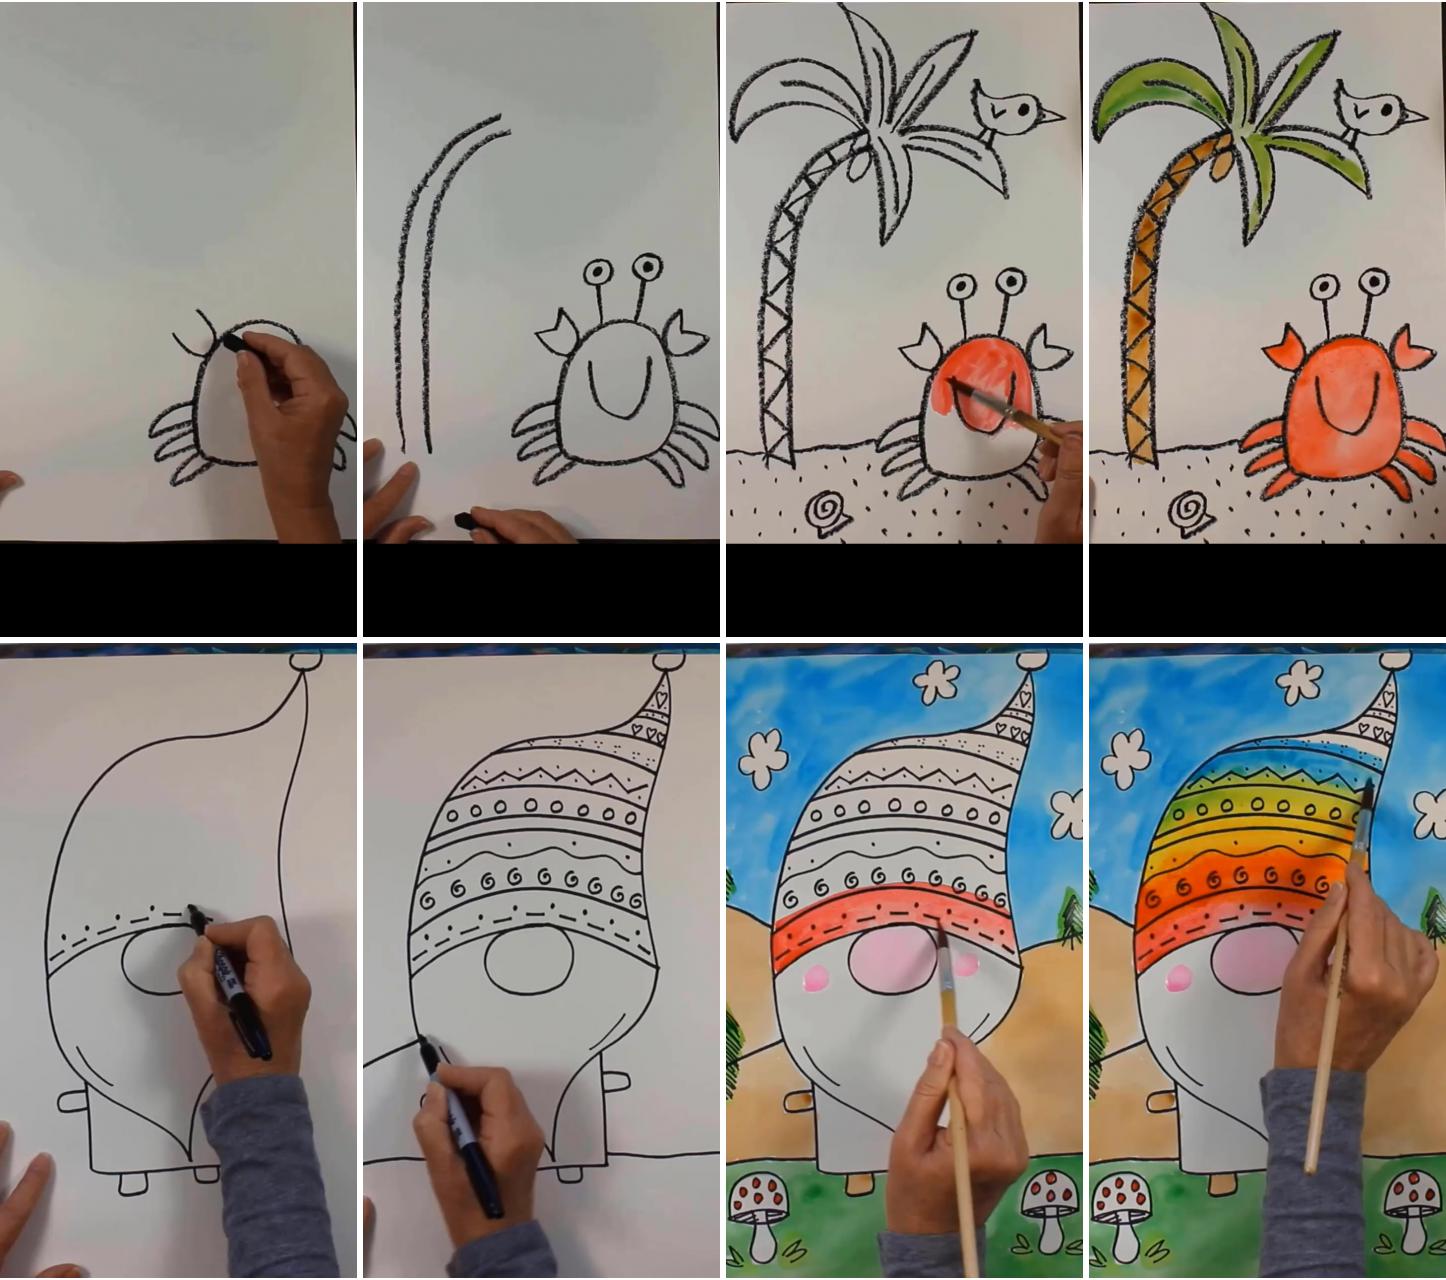 Easy video art project for kids: draw and watercolor paint a crab, palm tree, and bird on the beach | art project for kids and beginners: drawing and painting a gnome with a rainbow hat